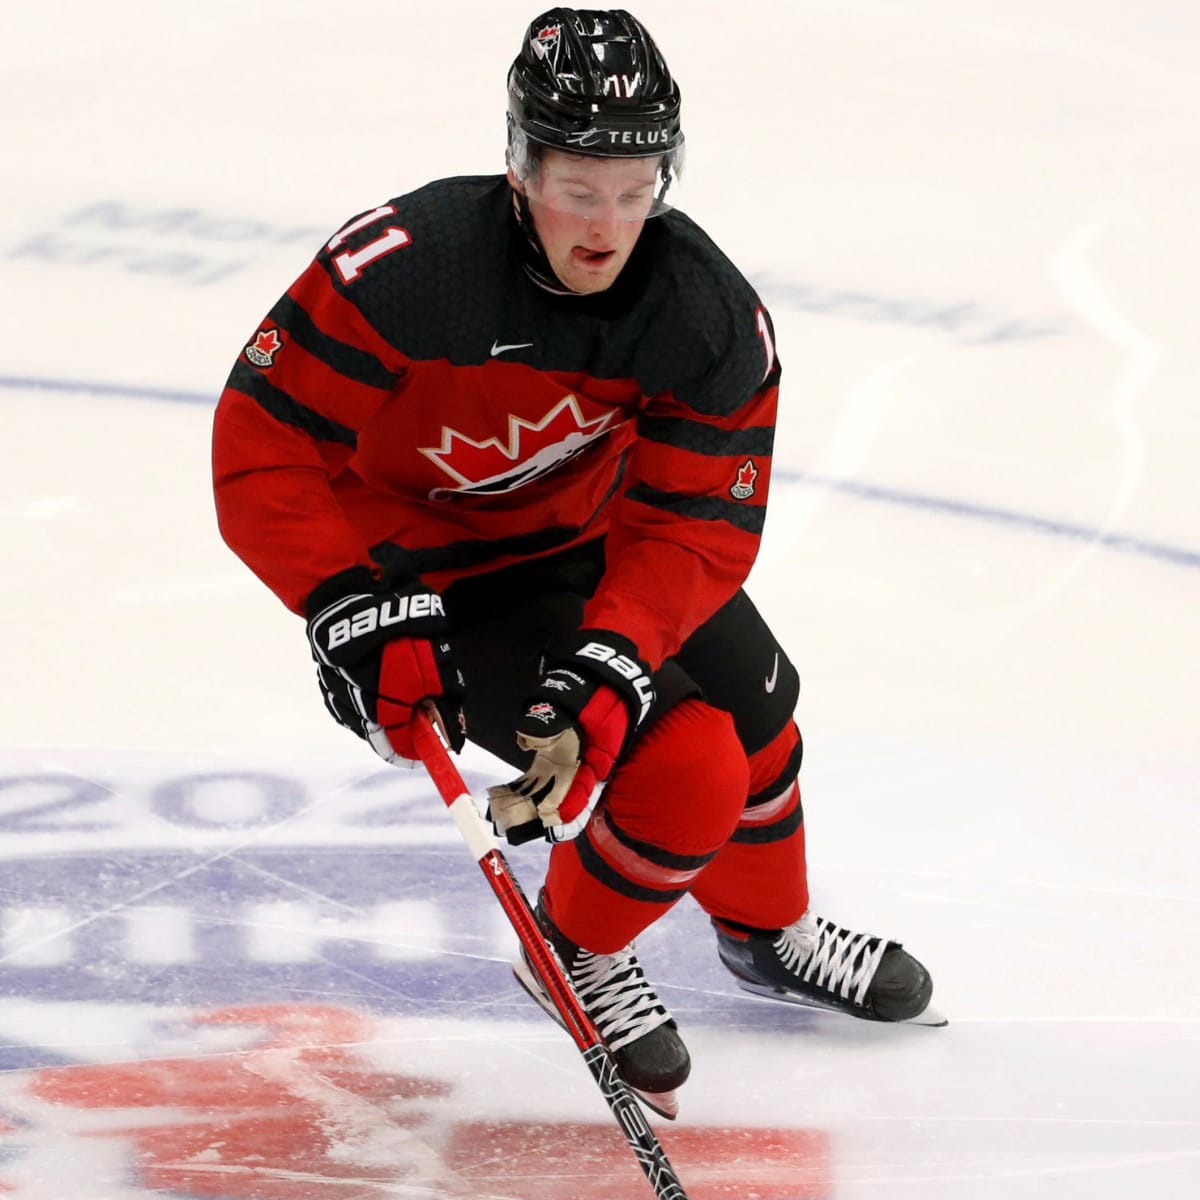 Alexis Lafreniere returns in style to lift Canada into WJC semifinals